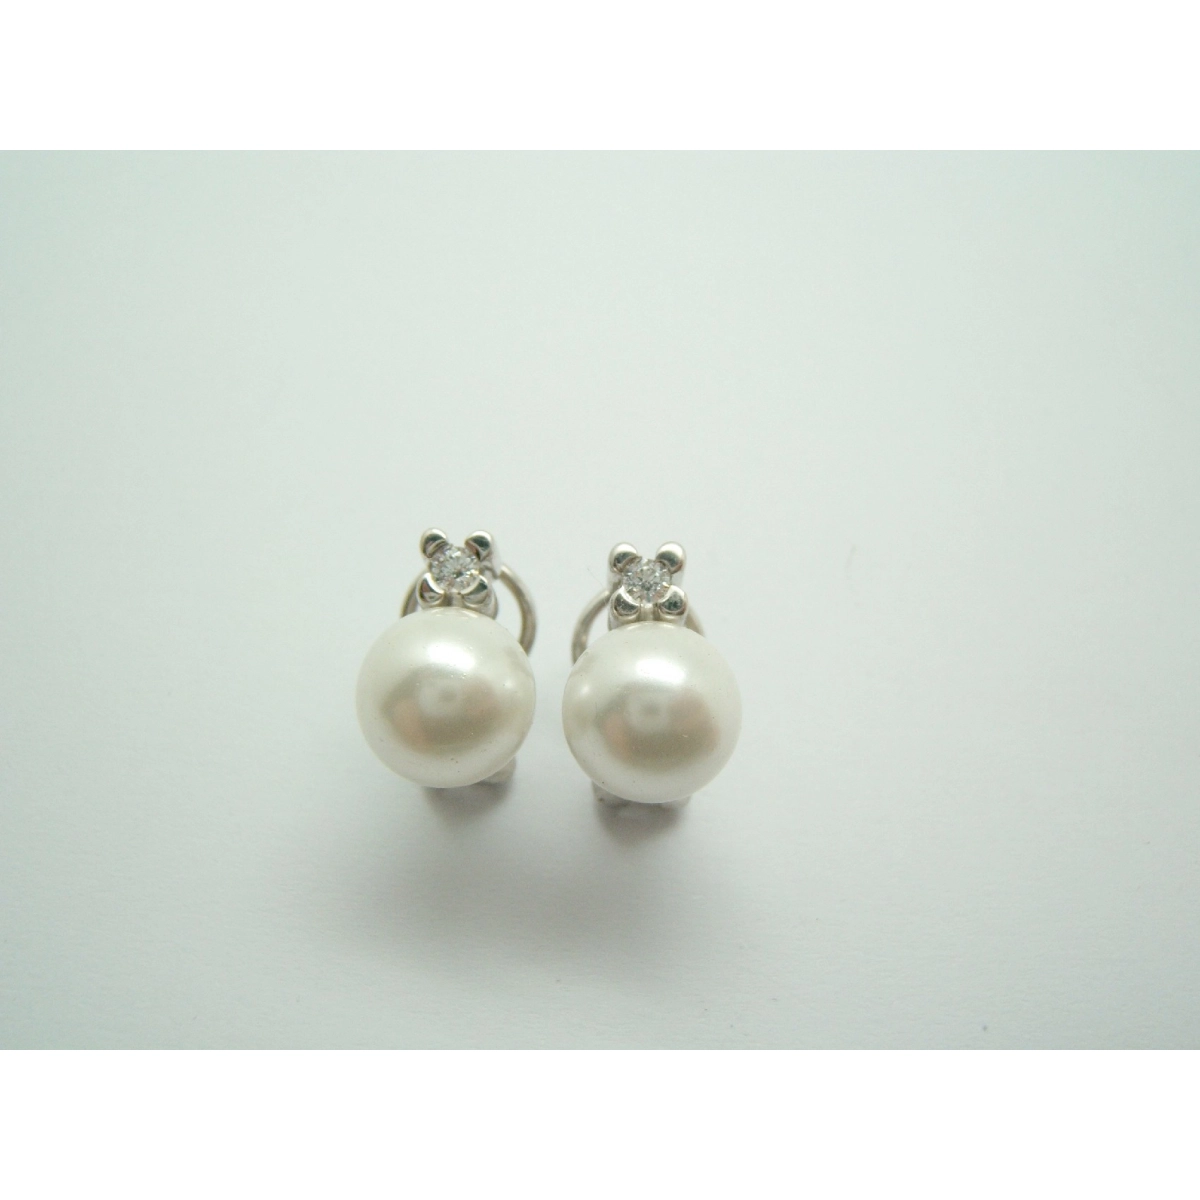 EARRINGS SILVER, YOU AND I ARE S-155 B-79